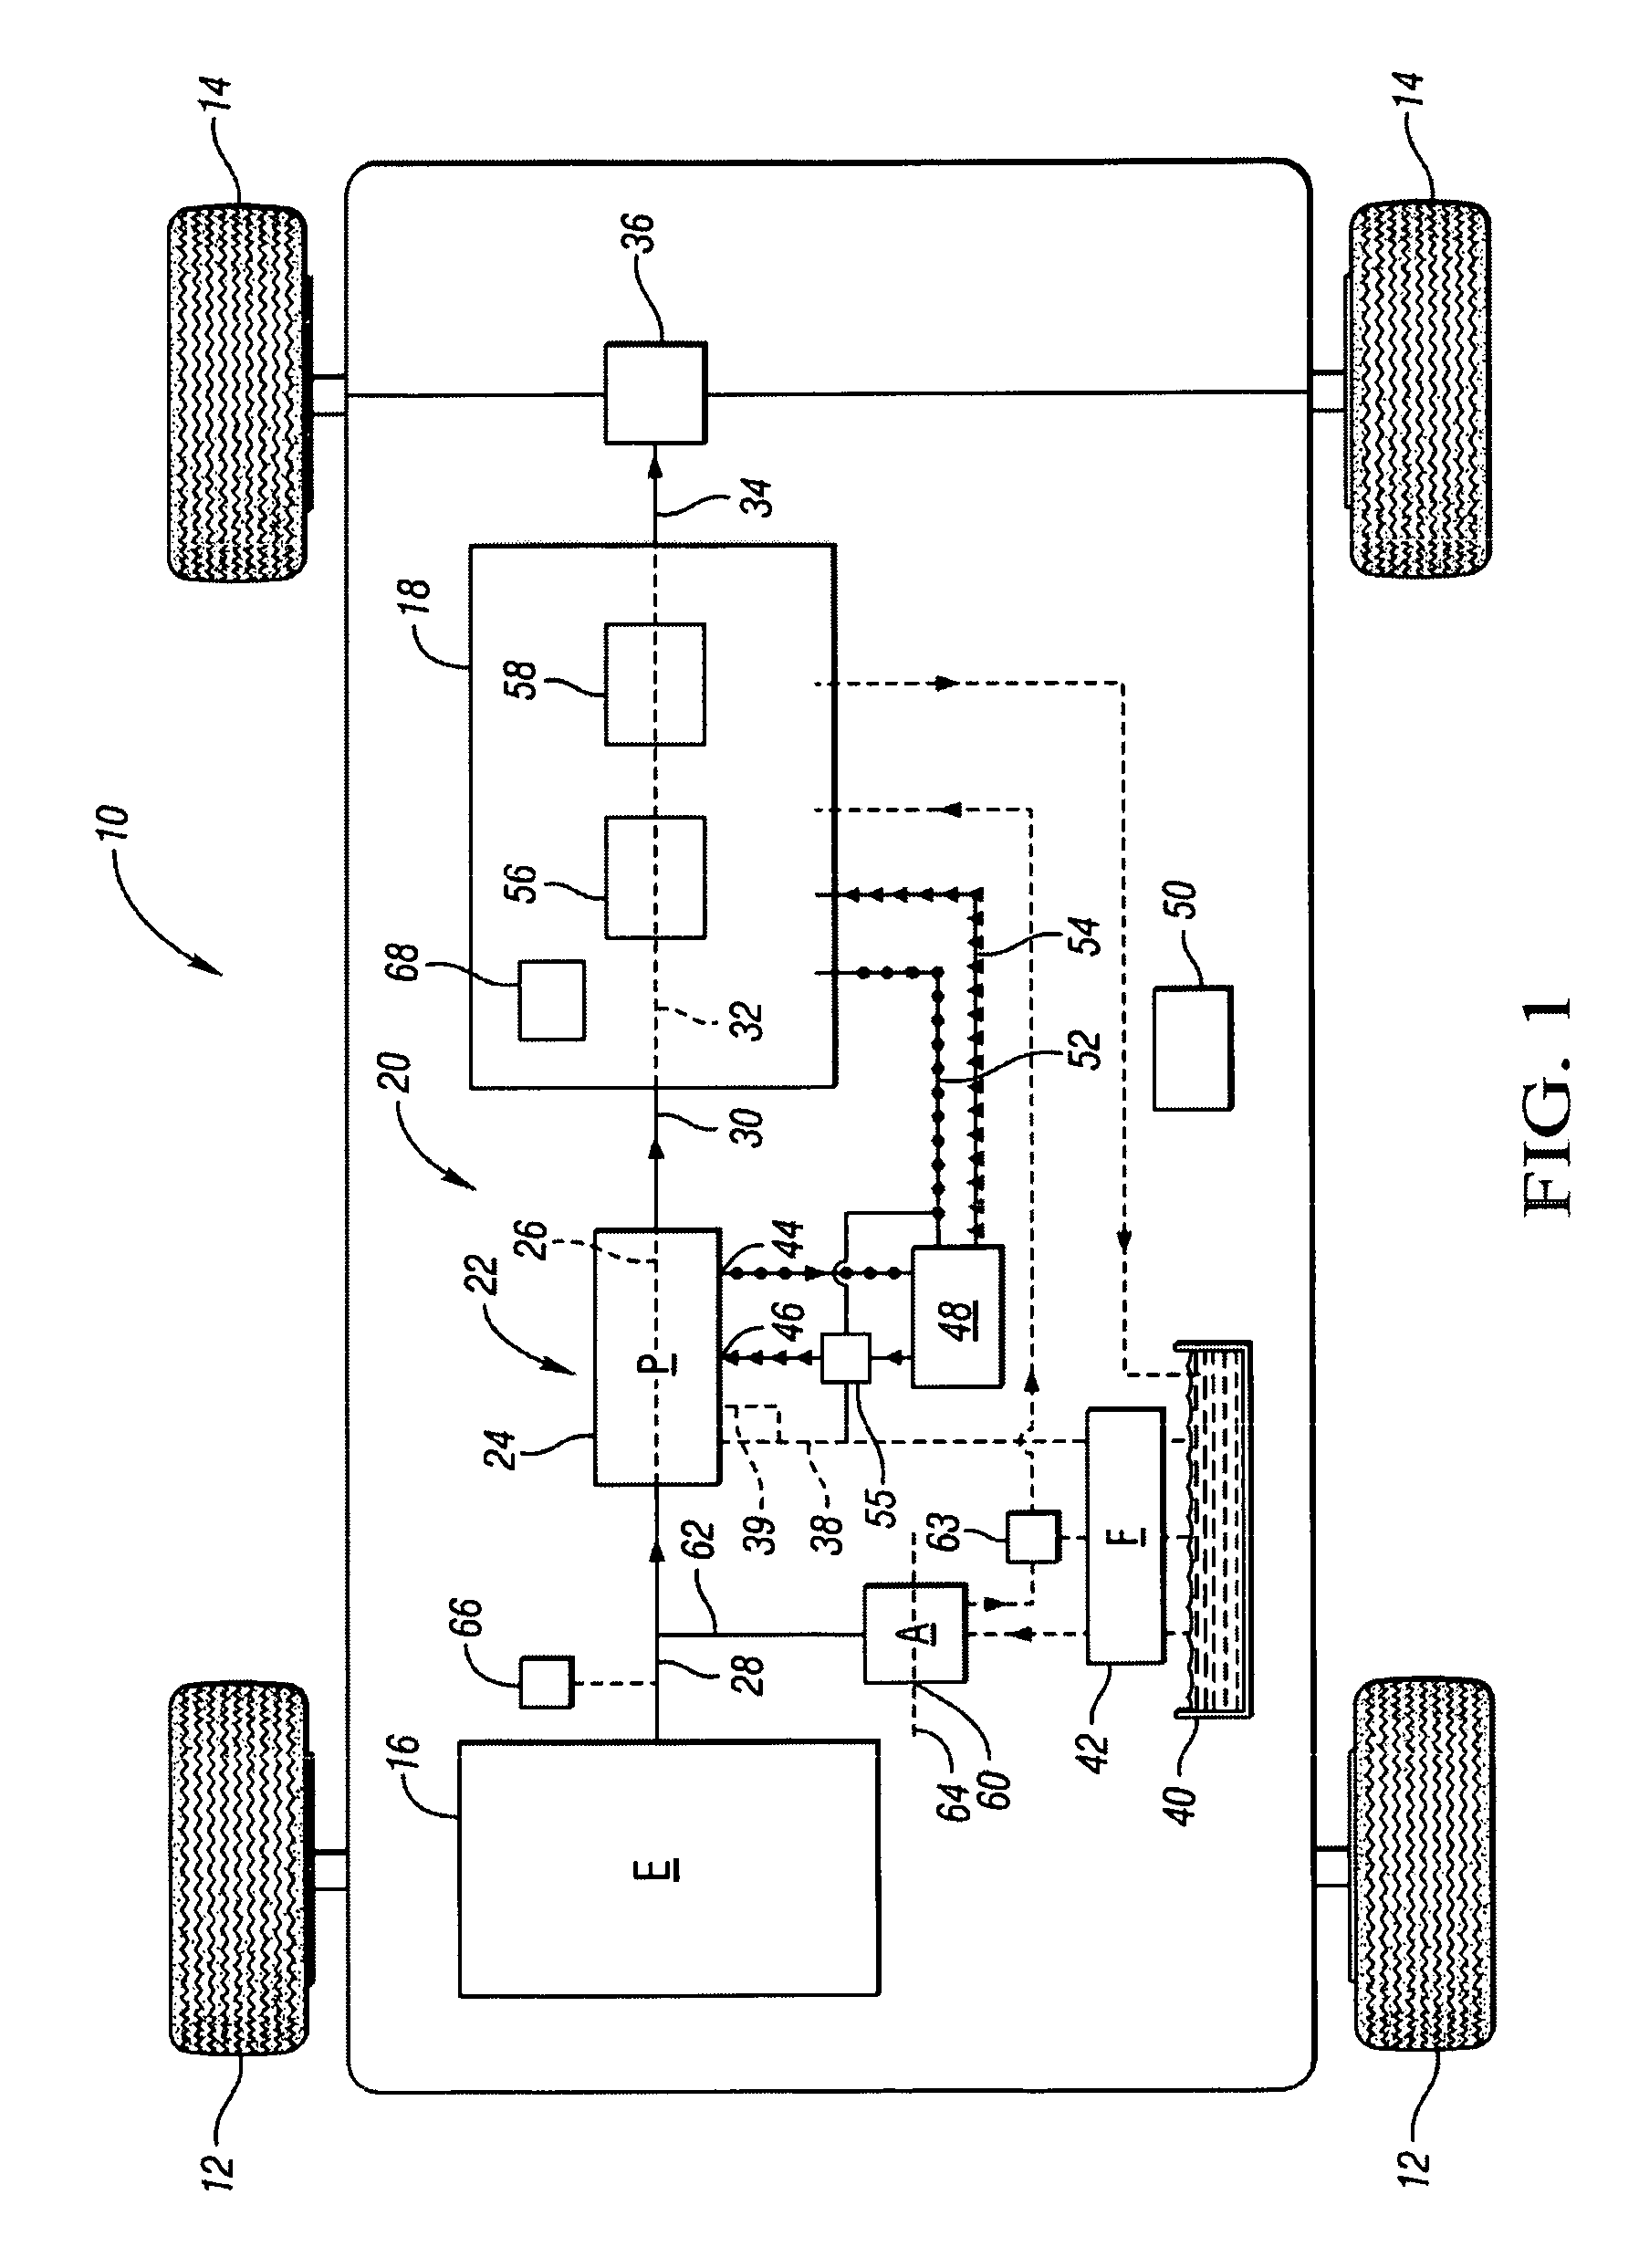 On-demand hydraulic pump for a transmission and method of operation